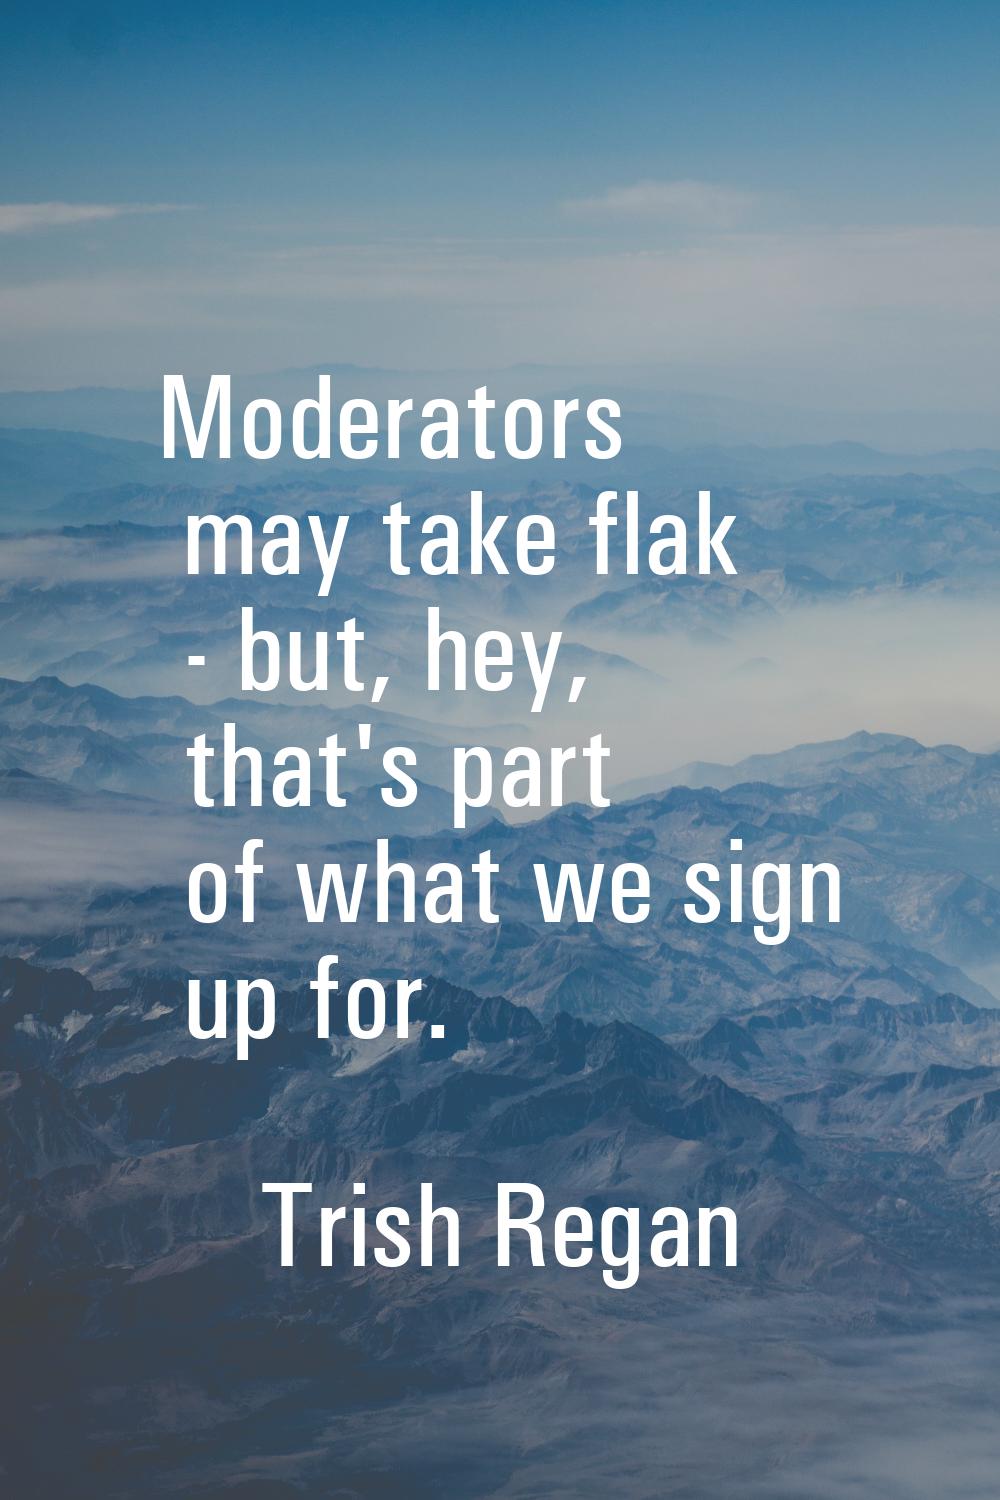 Moderators may take flak - but, hey, that's part of what we sign up for.